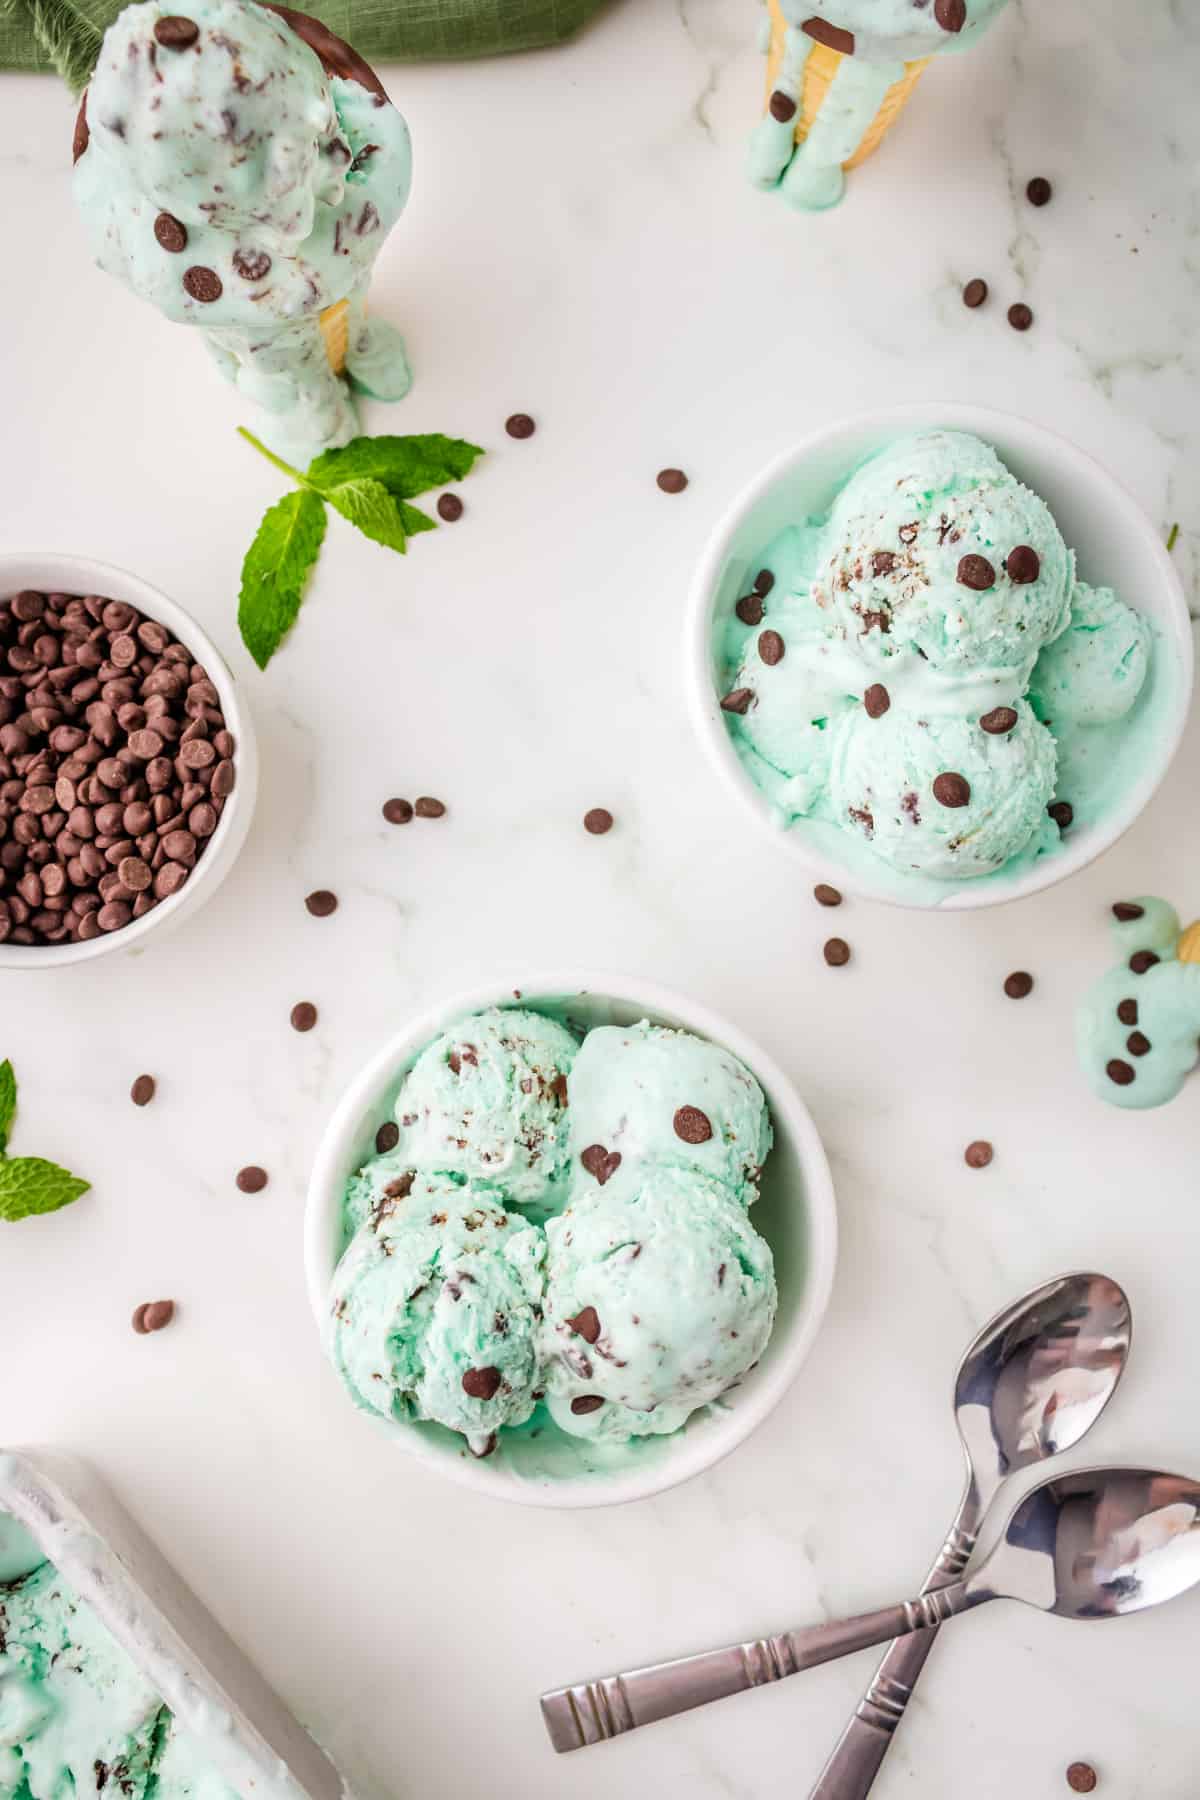 Green homemade ice cream in white bowls with chocolate chips on top.